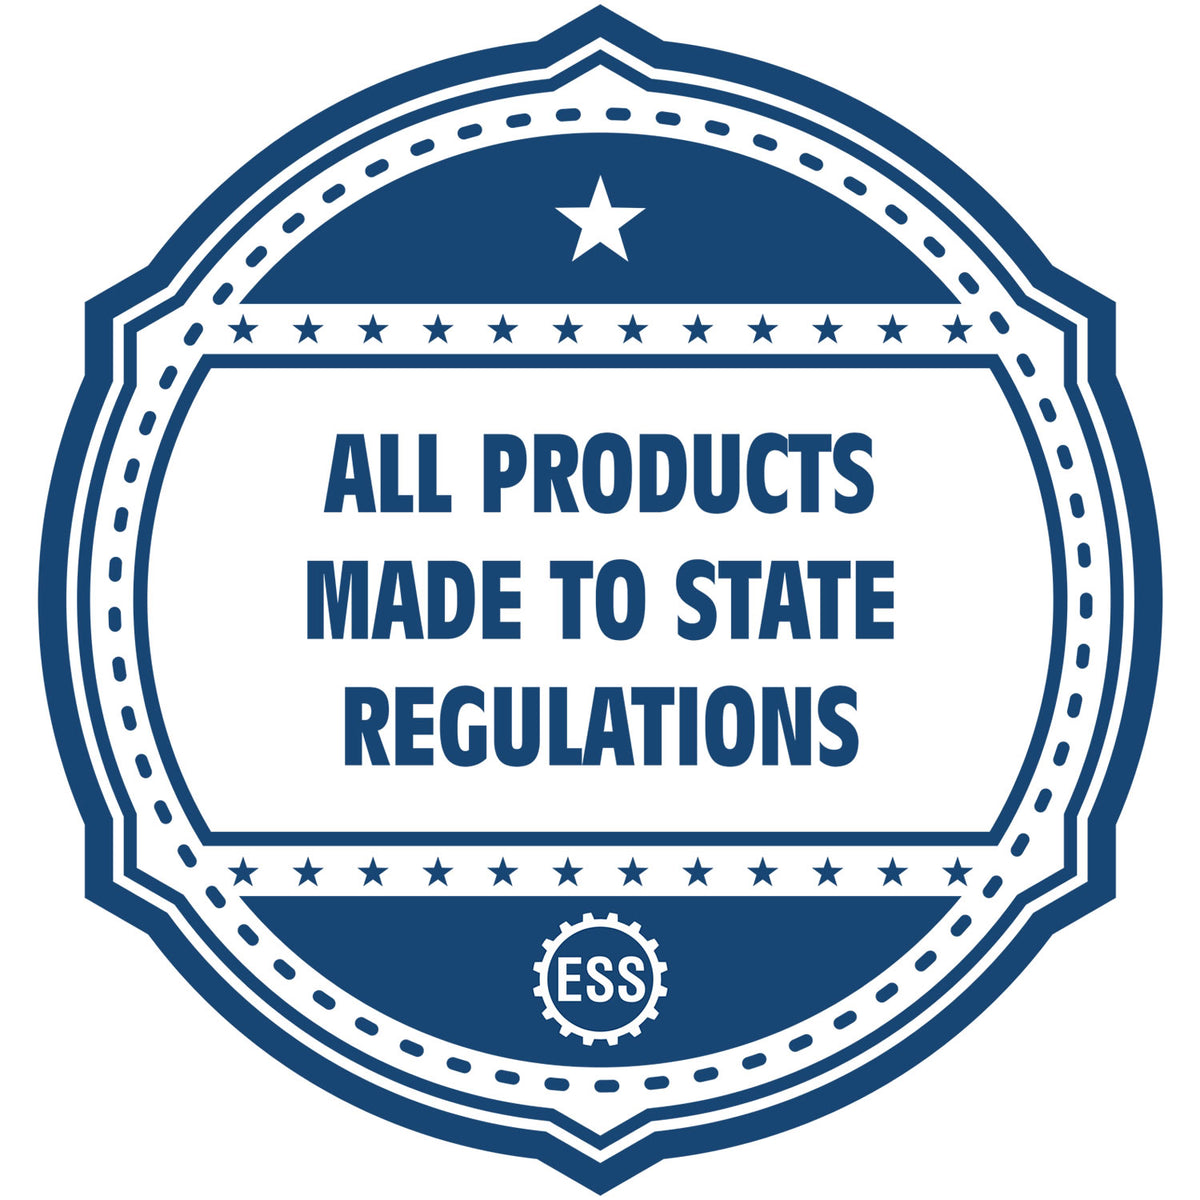 An icon or badge element for the Premium MaxLight Pre-Inked Tennessee Engineering Stamp showing that this product is made in compliance with state regulations.